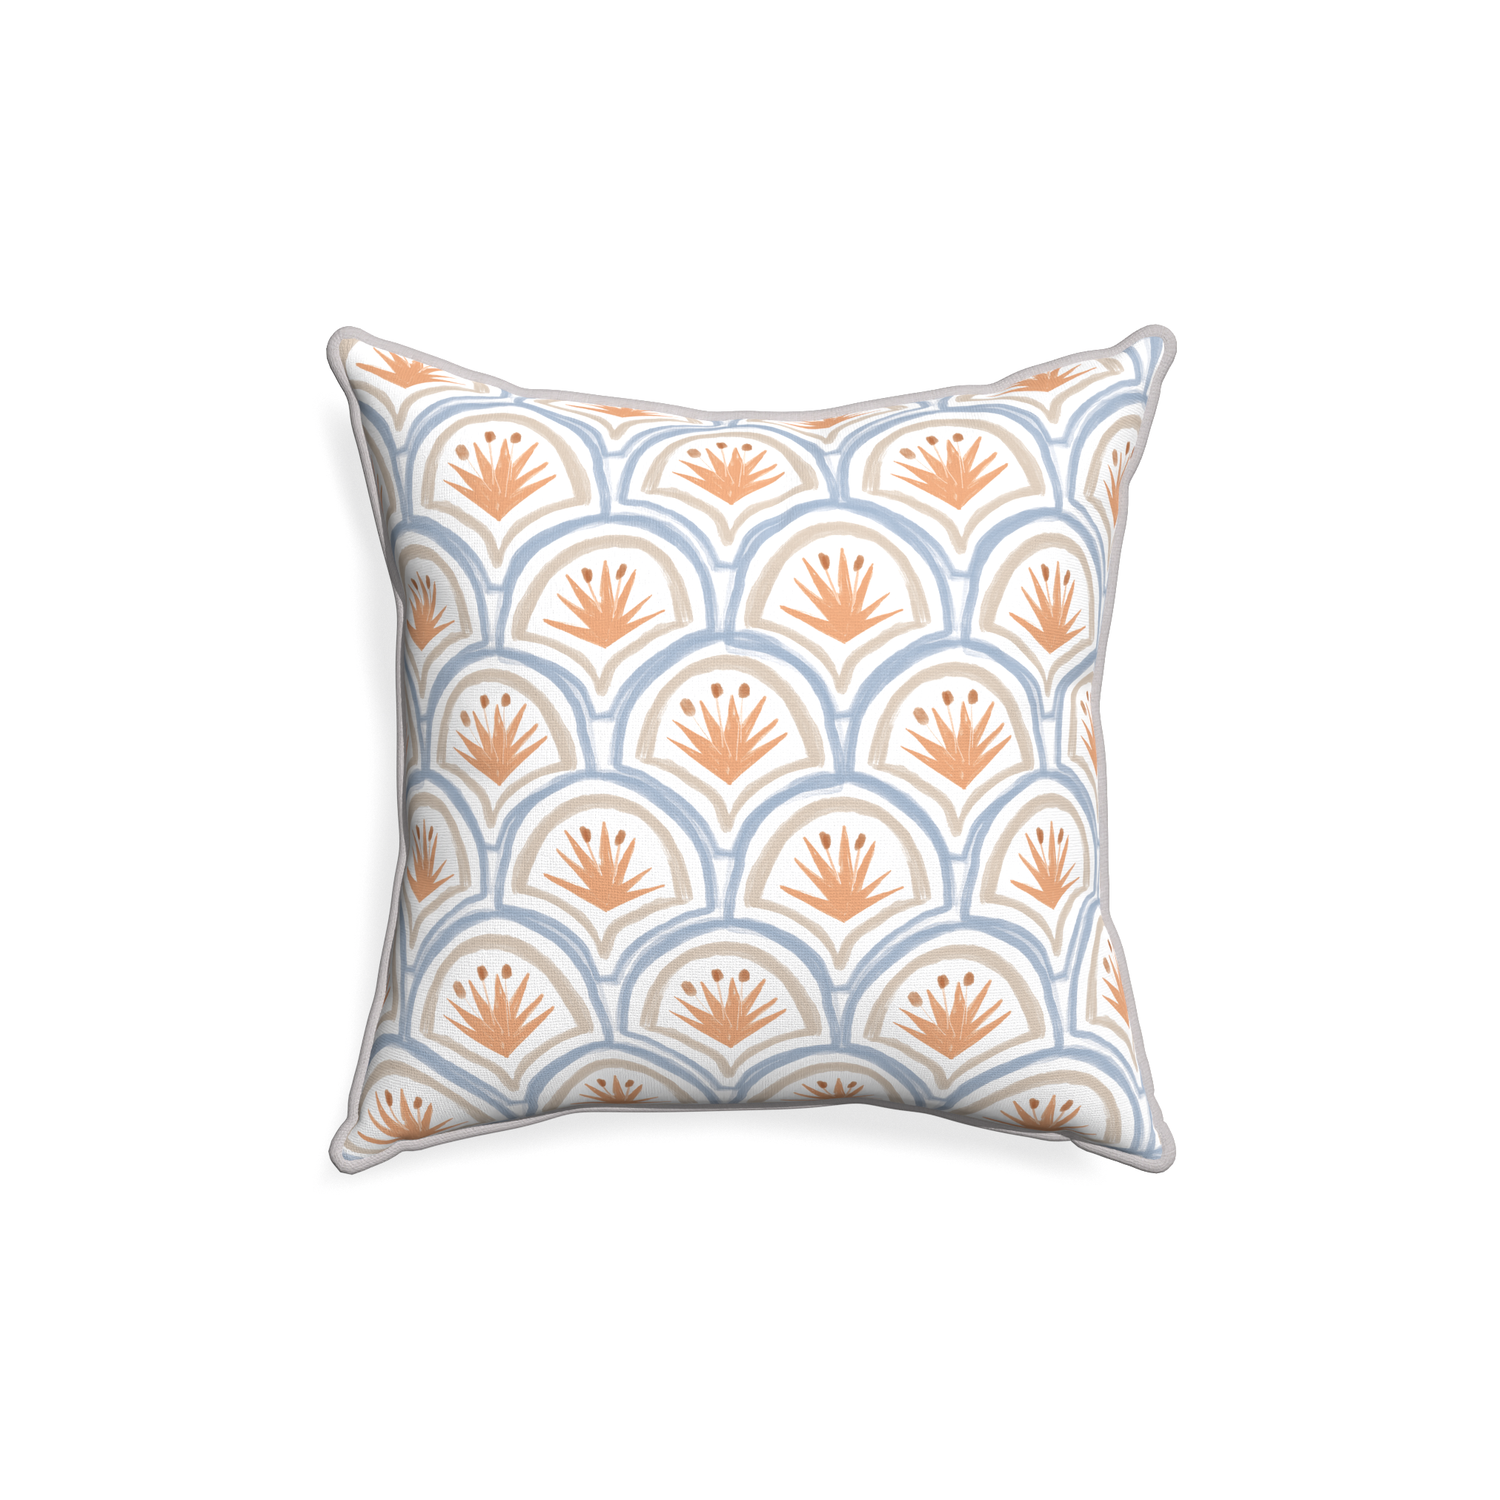 18-square thatcher apricot custom art deco palm patternpillow with pebble piping on white background